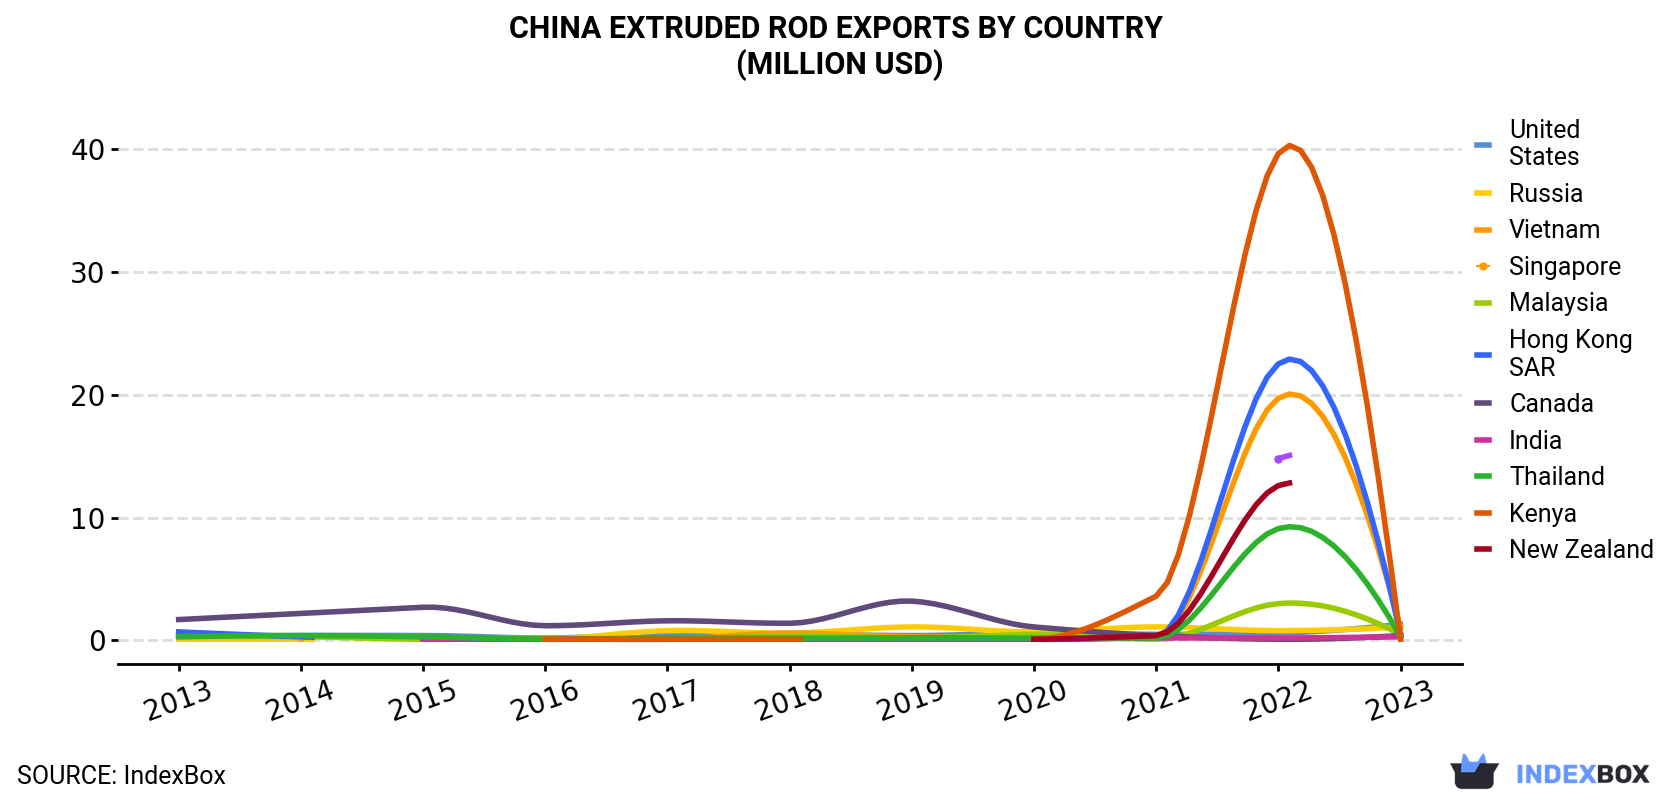 China Extruded Rod Exports By Country (Million USD)